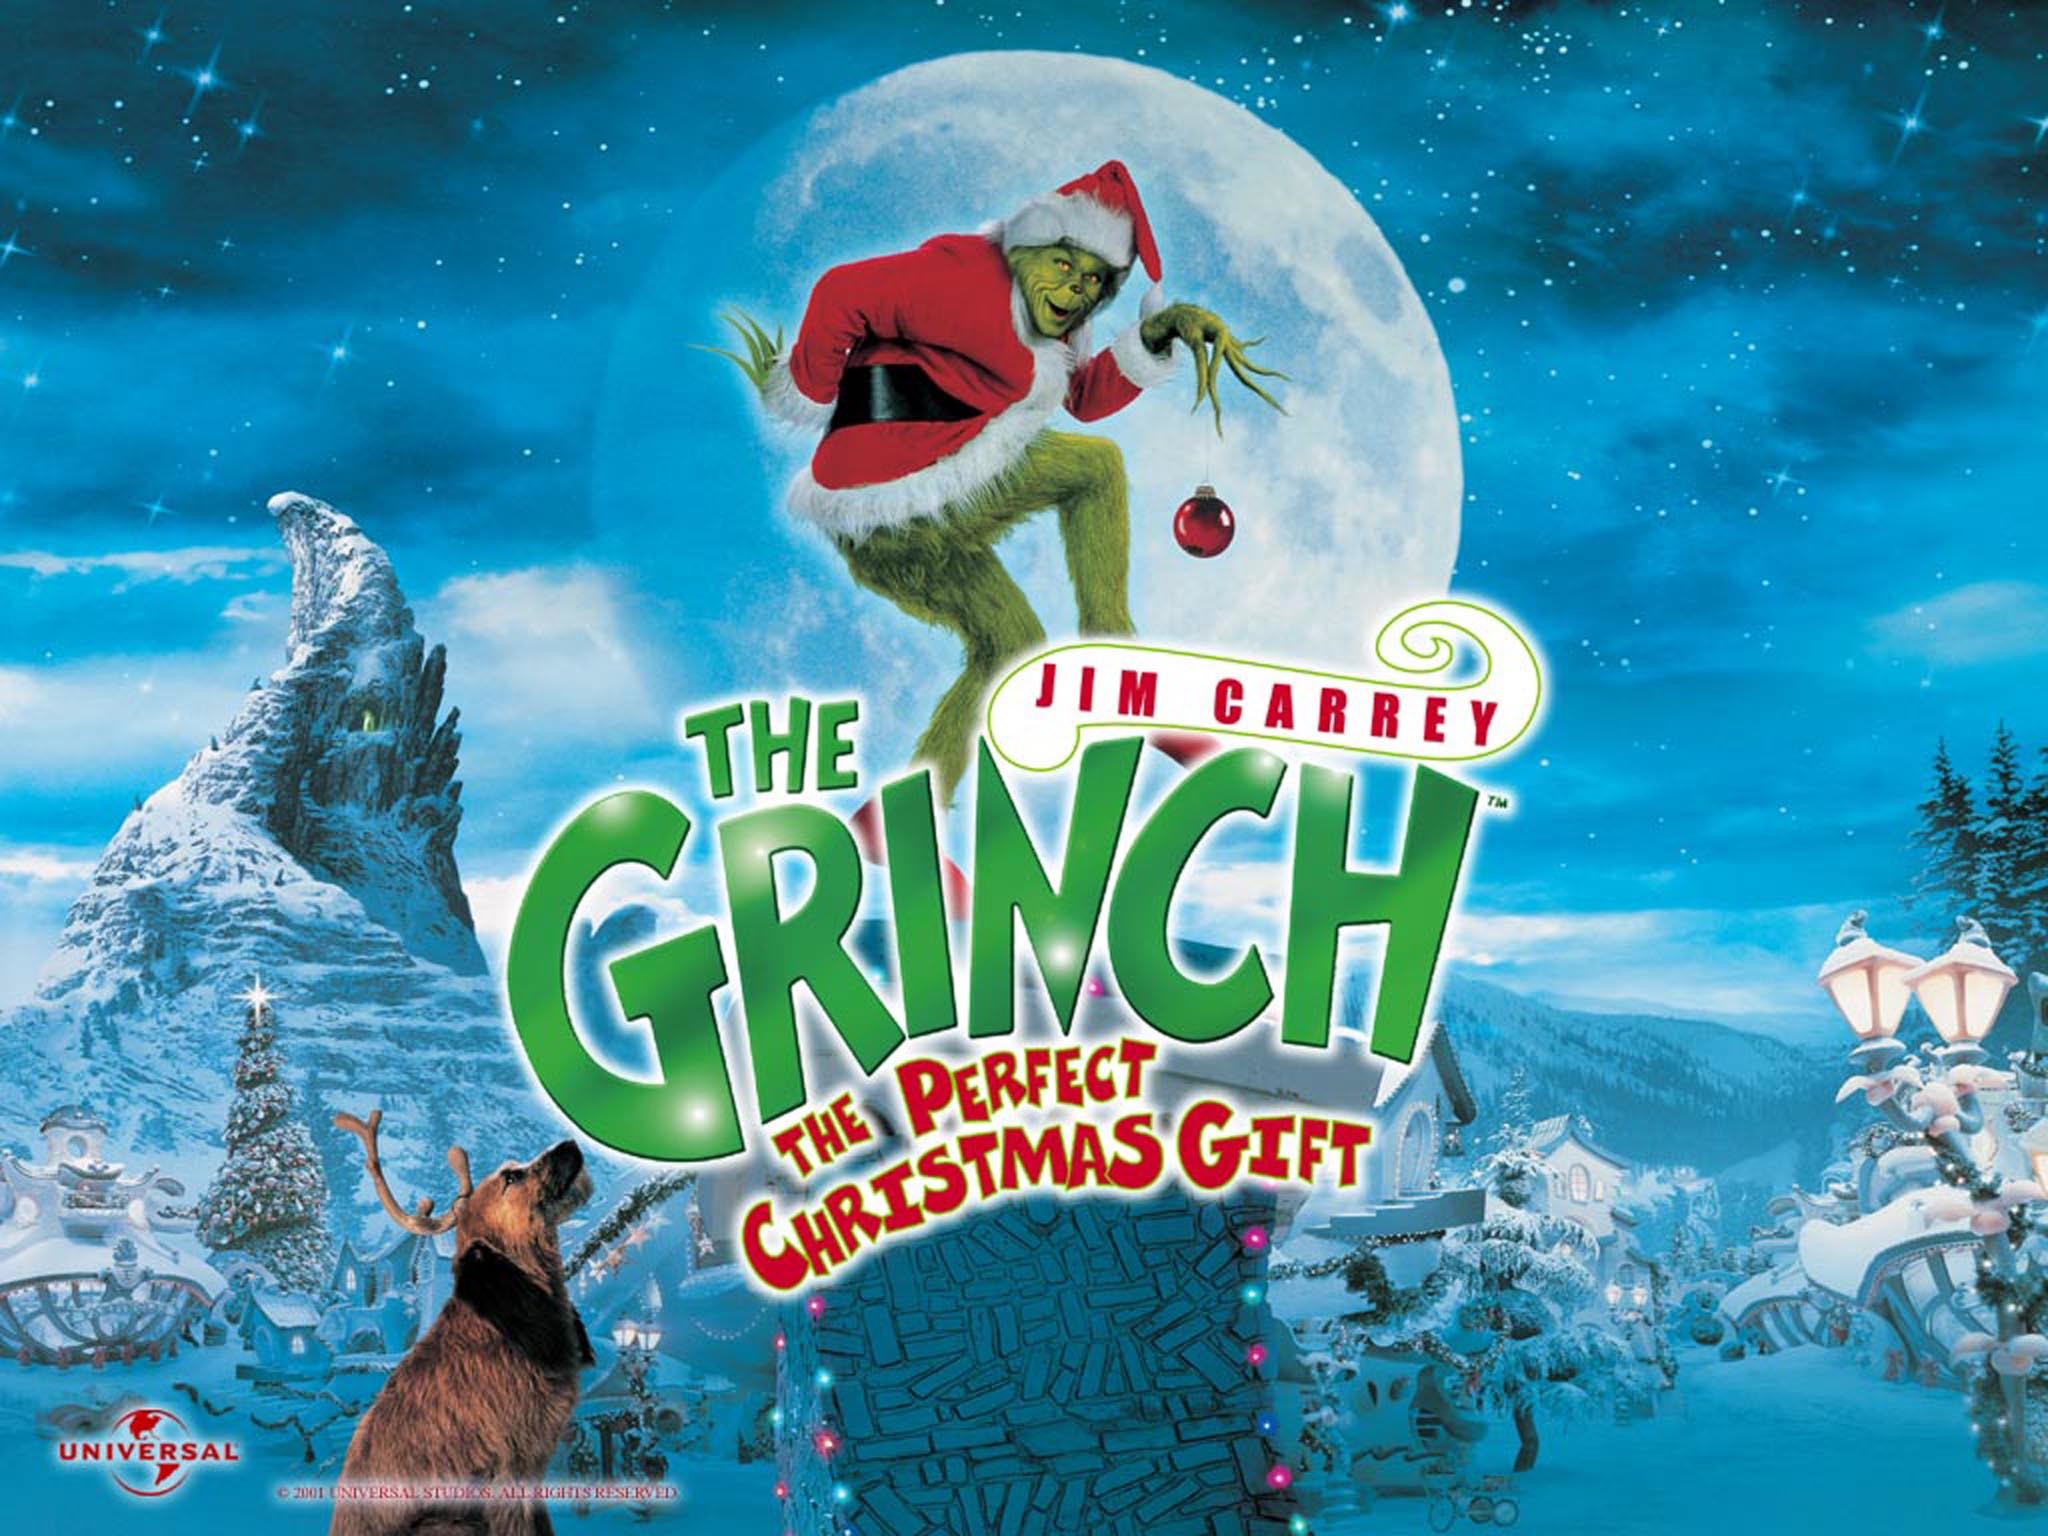 Grinch In Santa Dress Dr Seuss How the Grinch Stole Christmas The  Musical HD The Grinch Wallpapers  HD Wallpapers  ID 51366